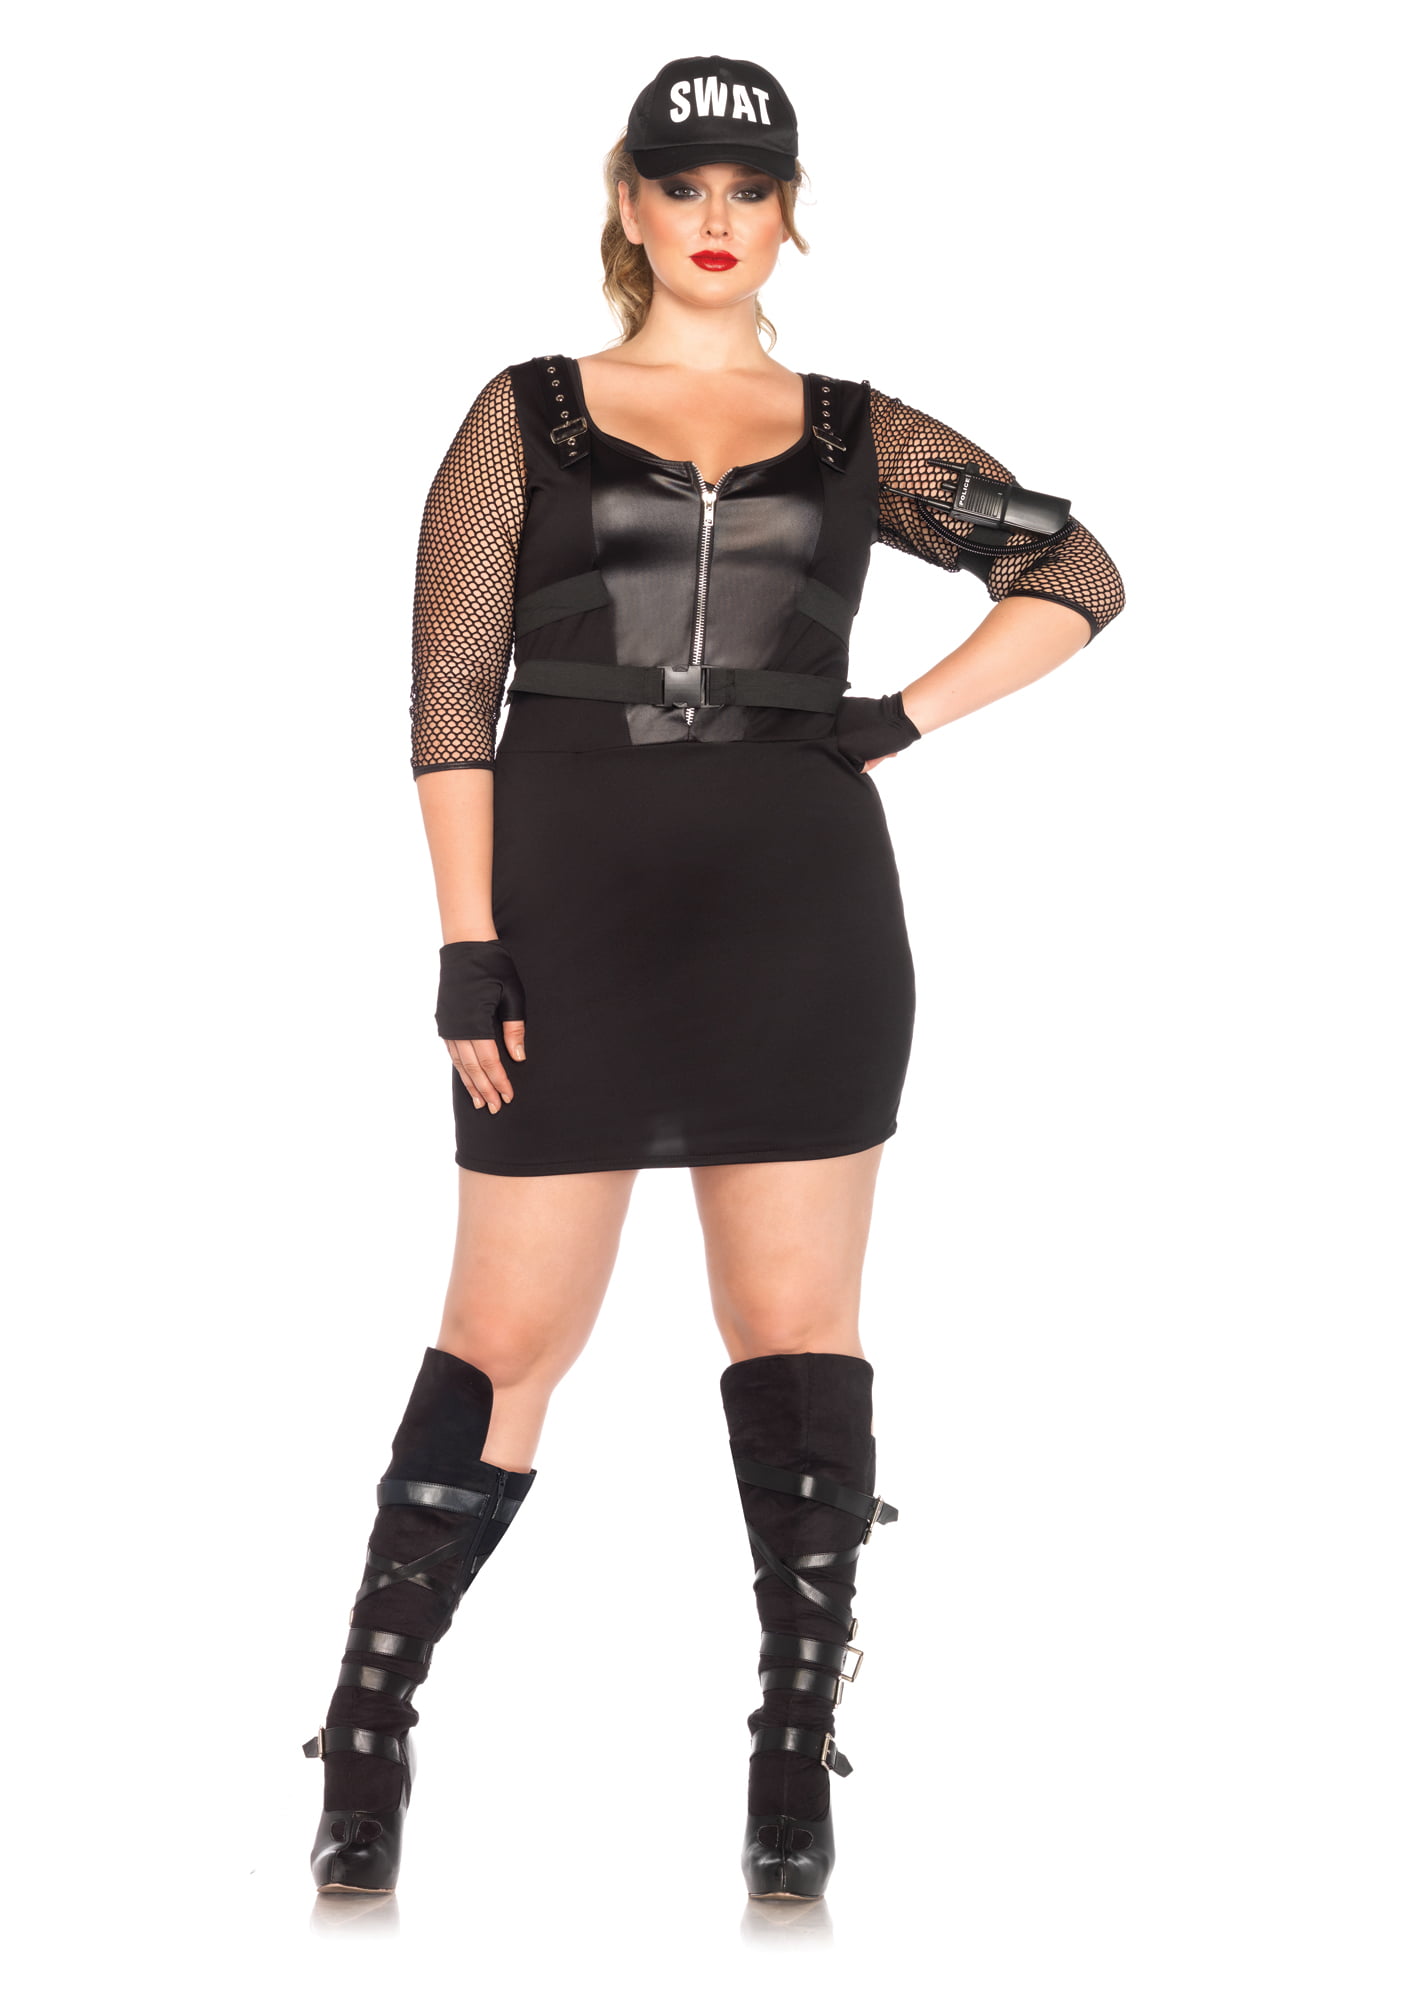 Adult SWAT Cop Officer Costume Plus Size NWT